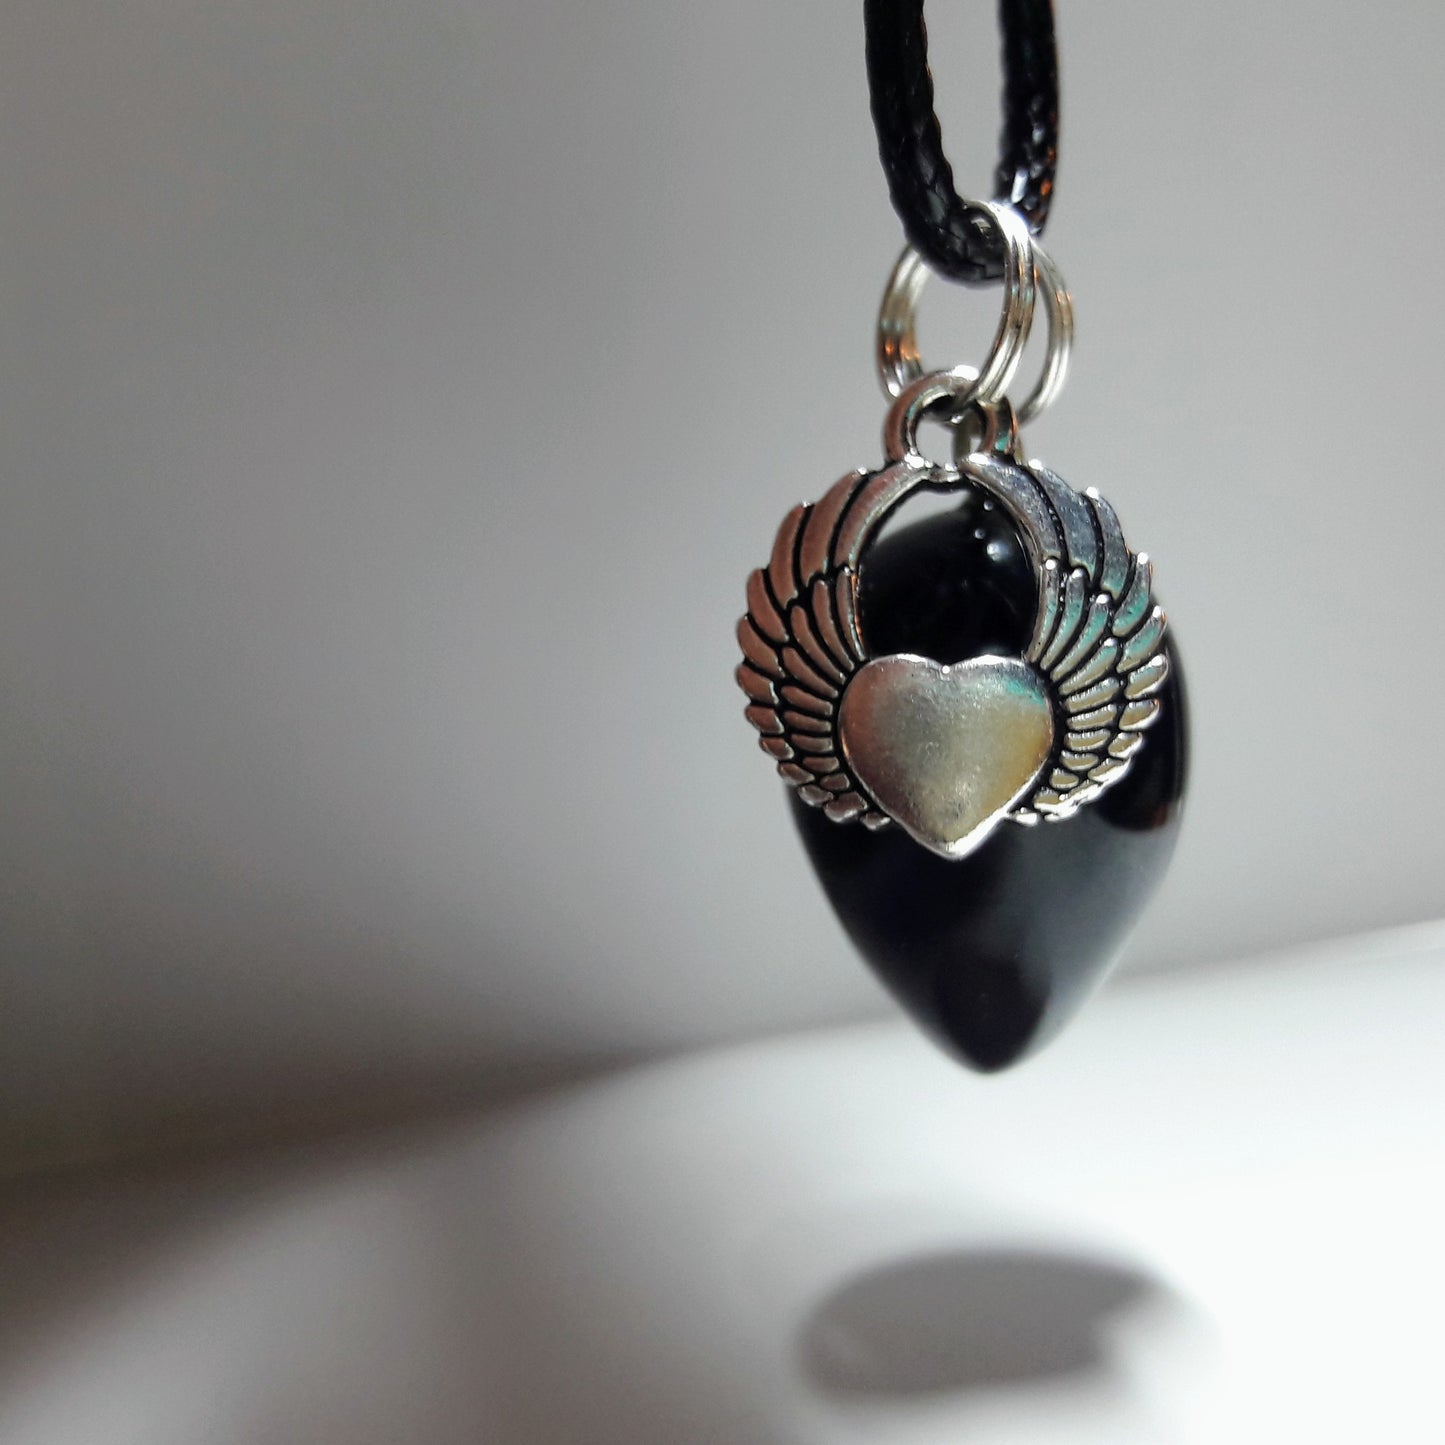 "Free to Fly" Winged Heart and Natural Black Onyx Pendulum Necklace Set